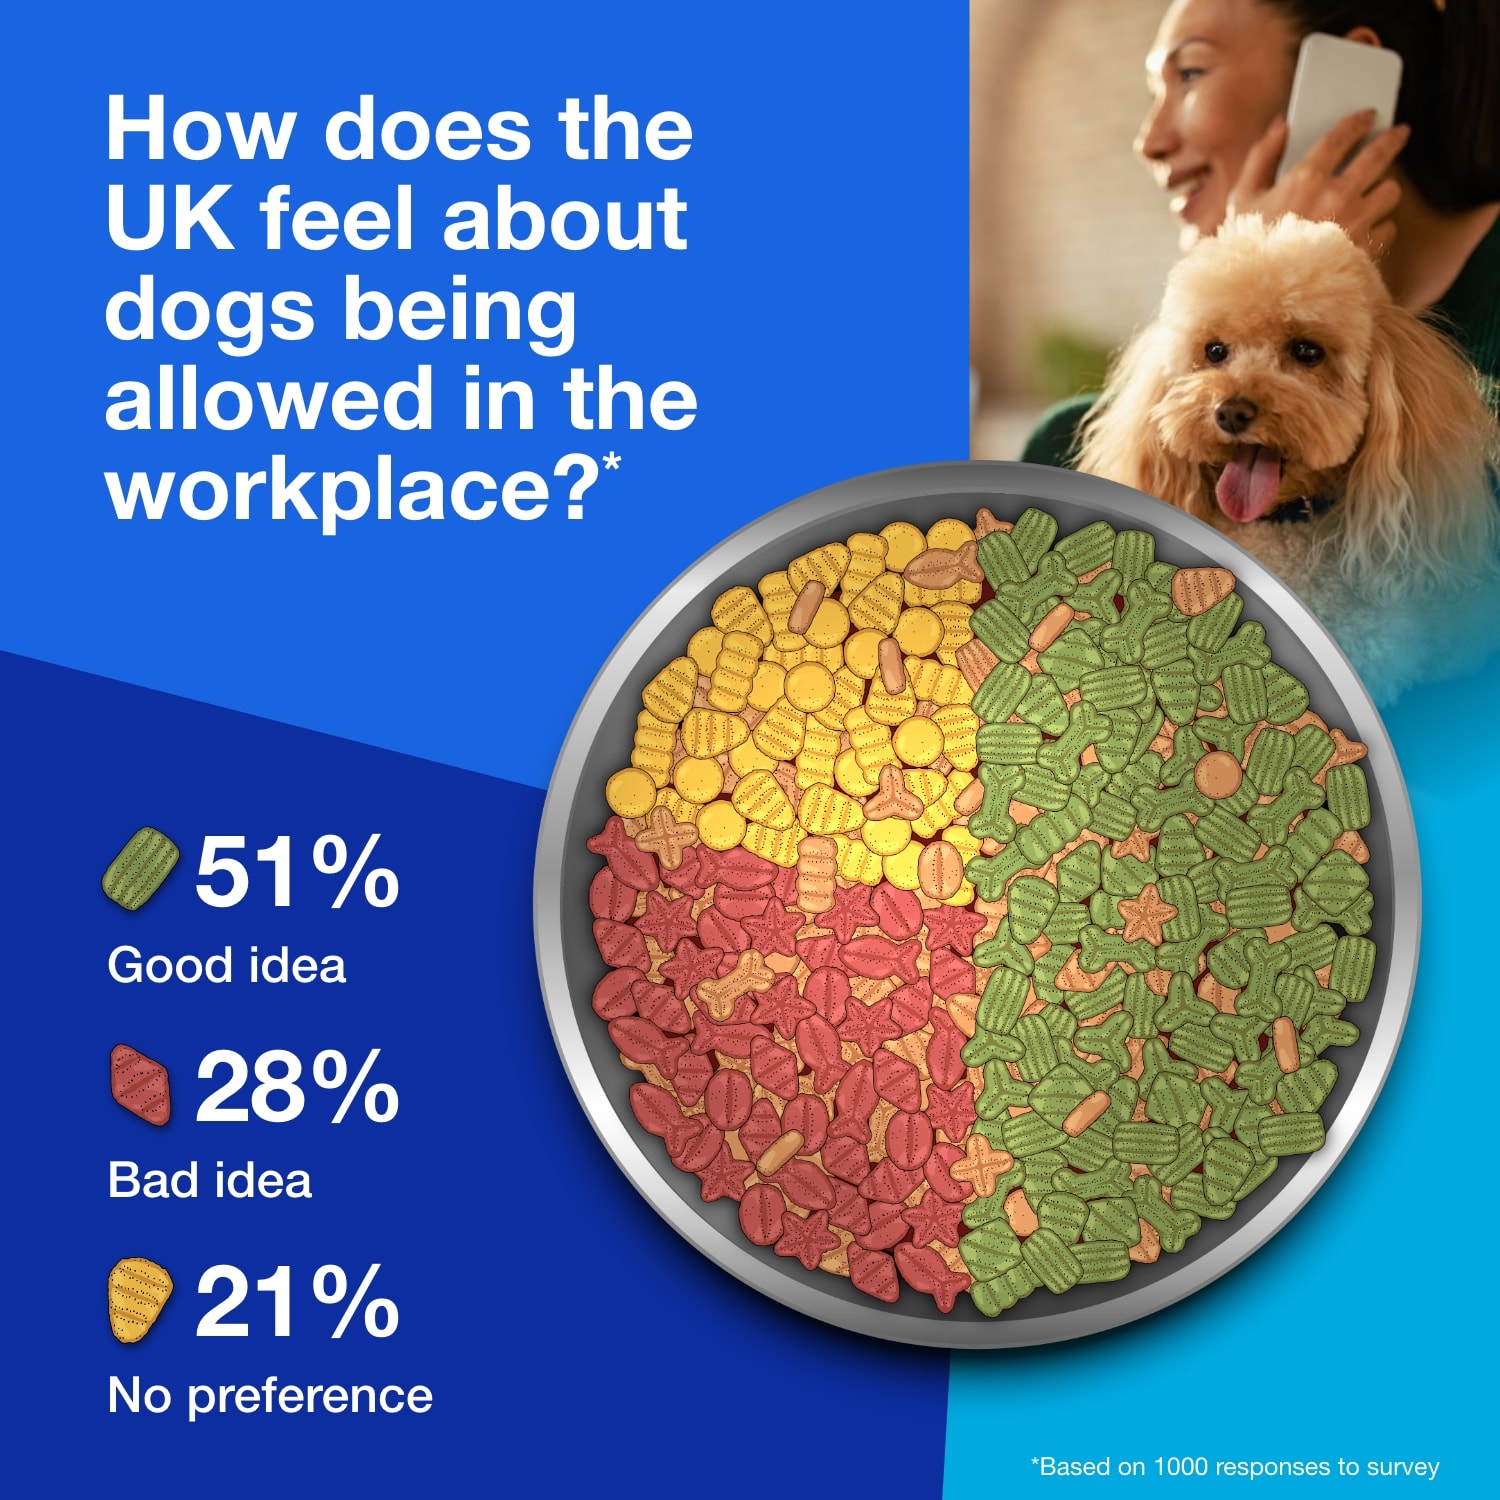 Infographic showing a bowl of dog biscuits divided into percentages to illustrate how the UK feels about dogs being allowed in the workplace